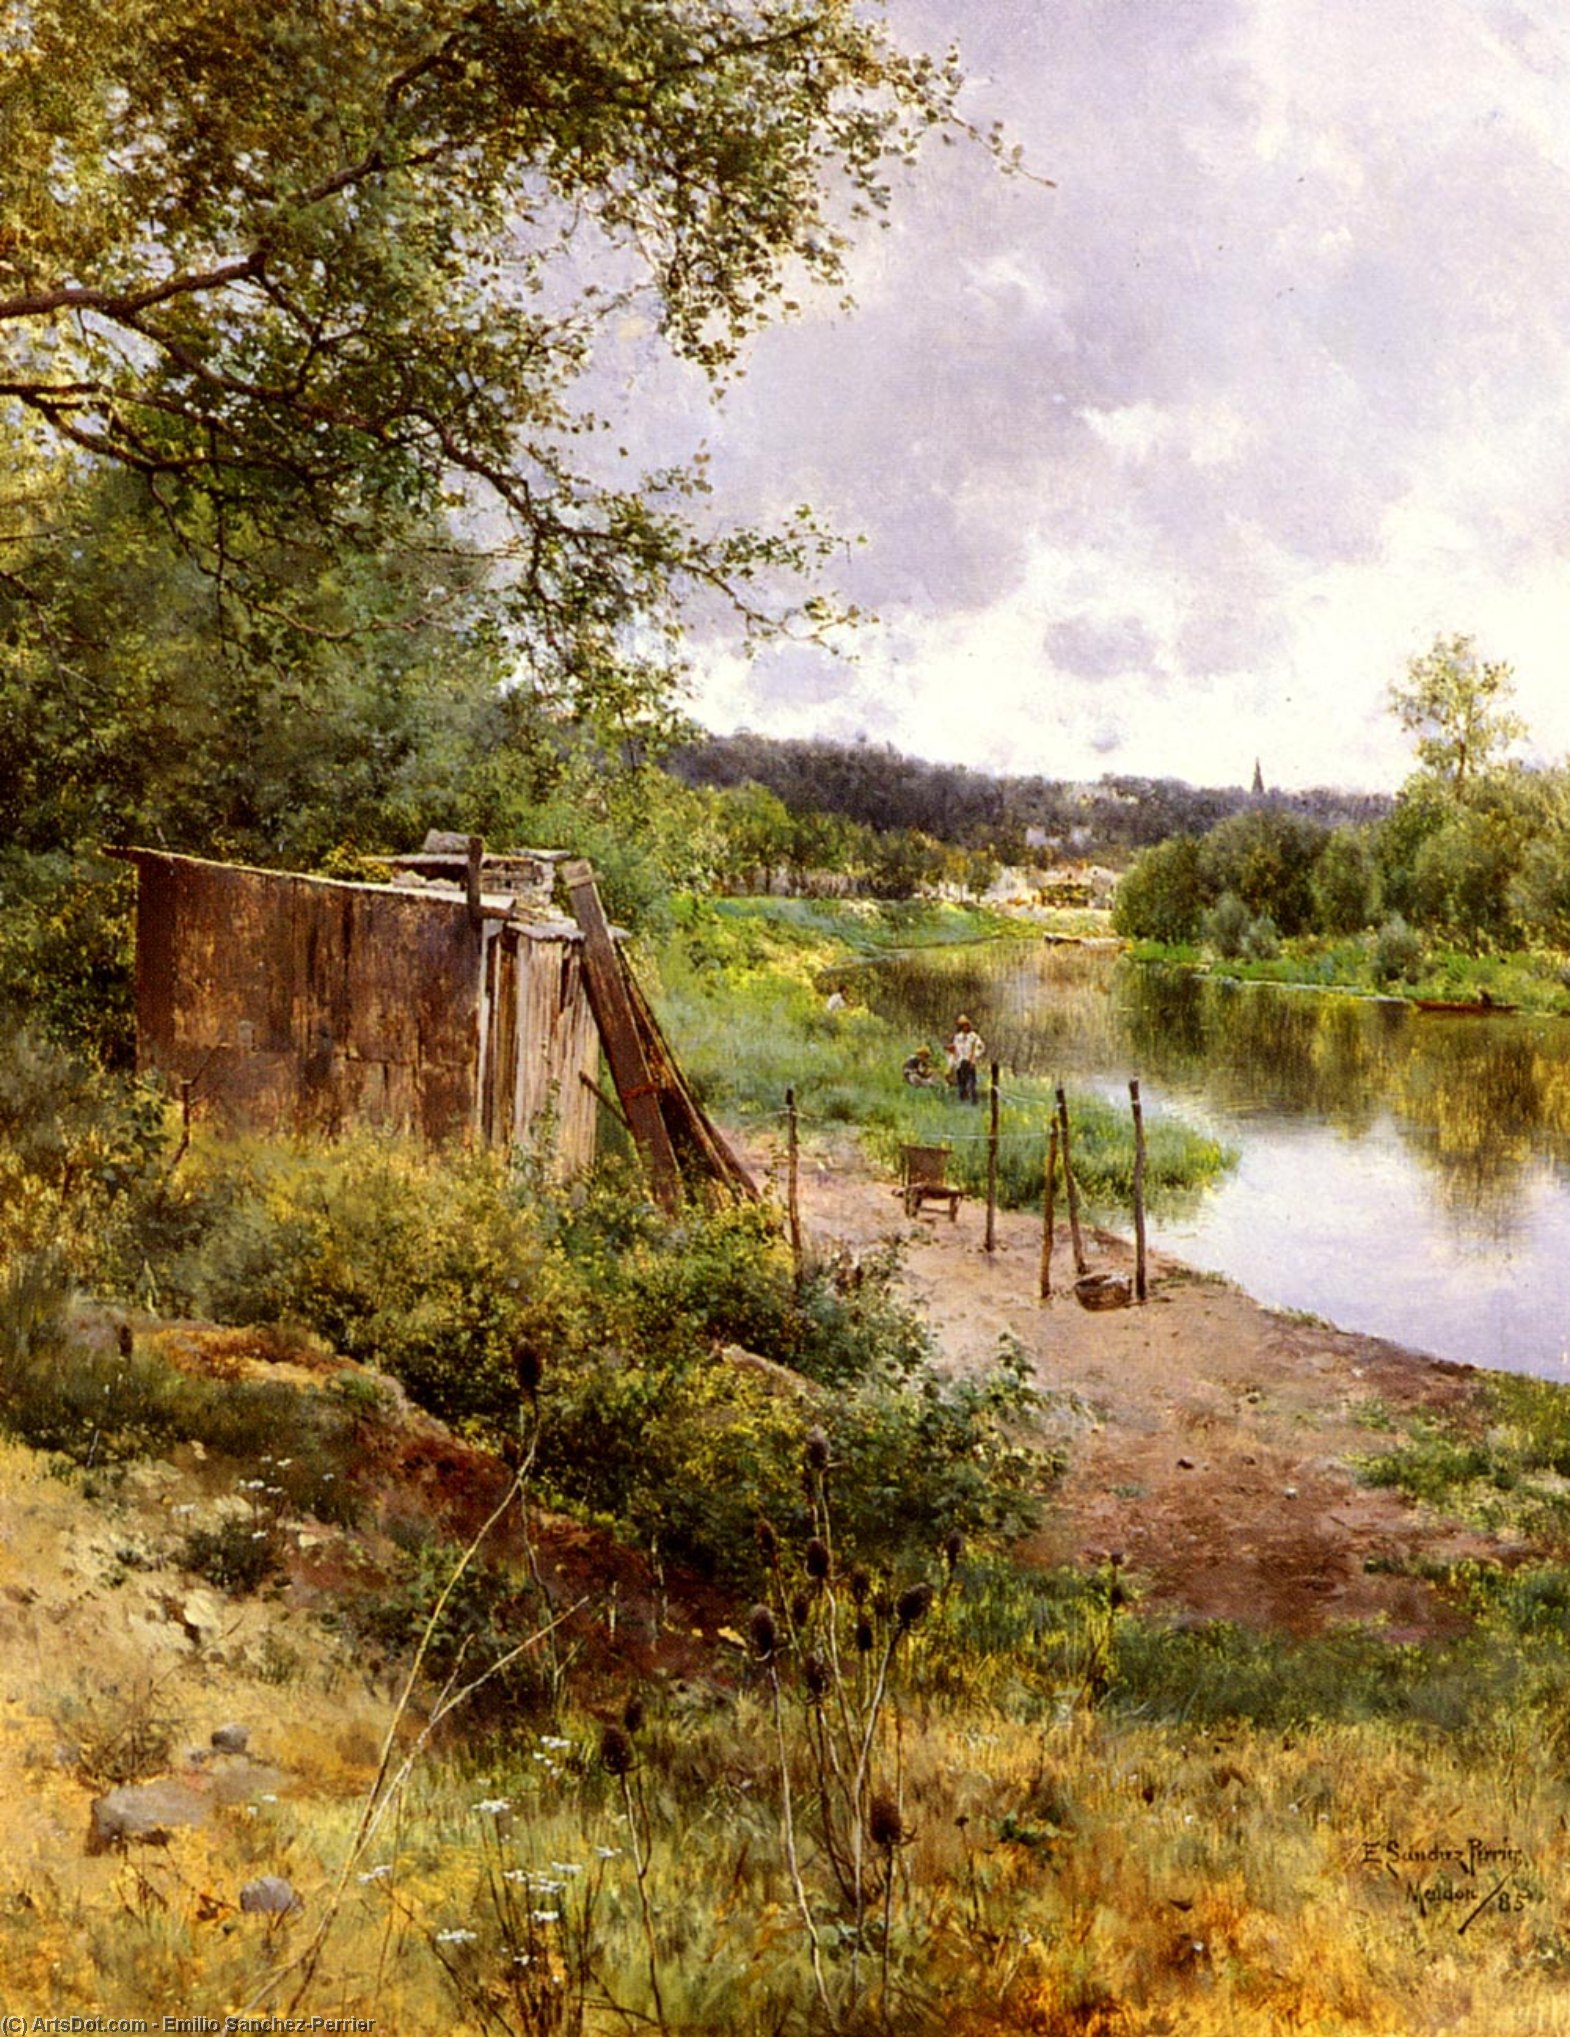 WikiOO.org - 백과 사전 - 회화, 삽화 Emilio Sanchez-Perrier - On The River Bank